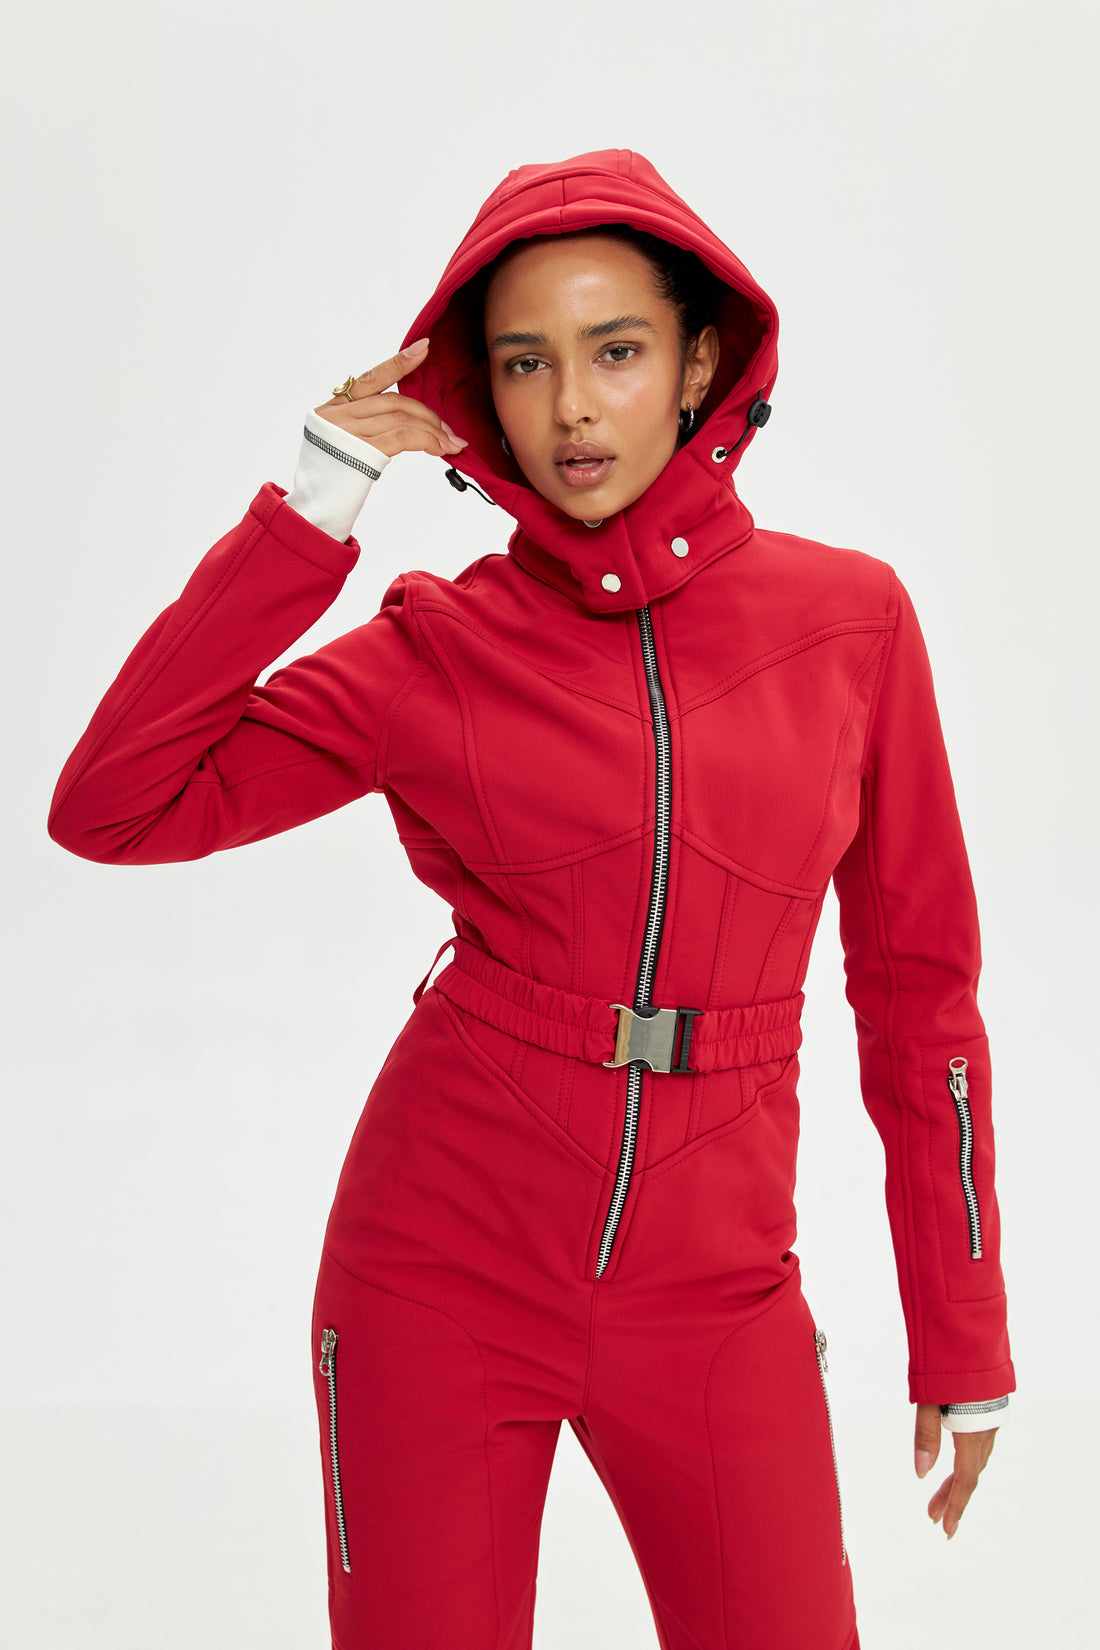 Ski suit with slim pants TABLE - RED Skinny ski suit for chic winter vacation outfit